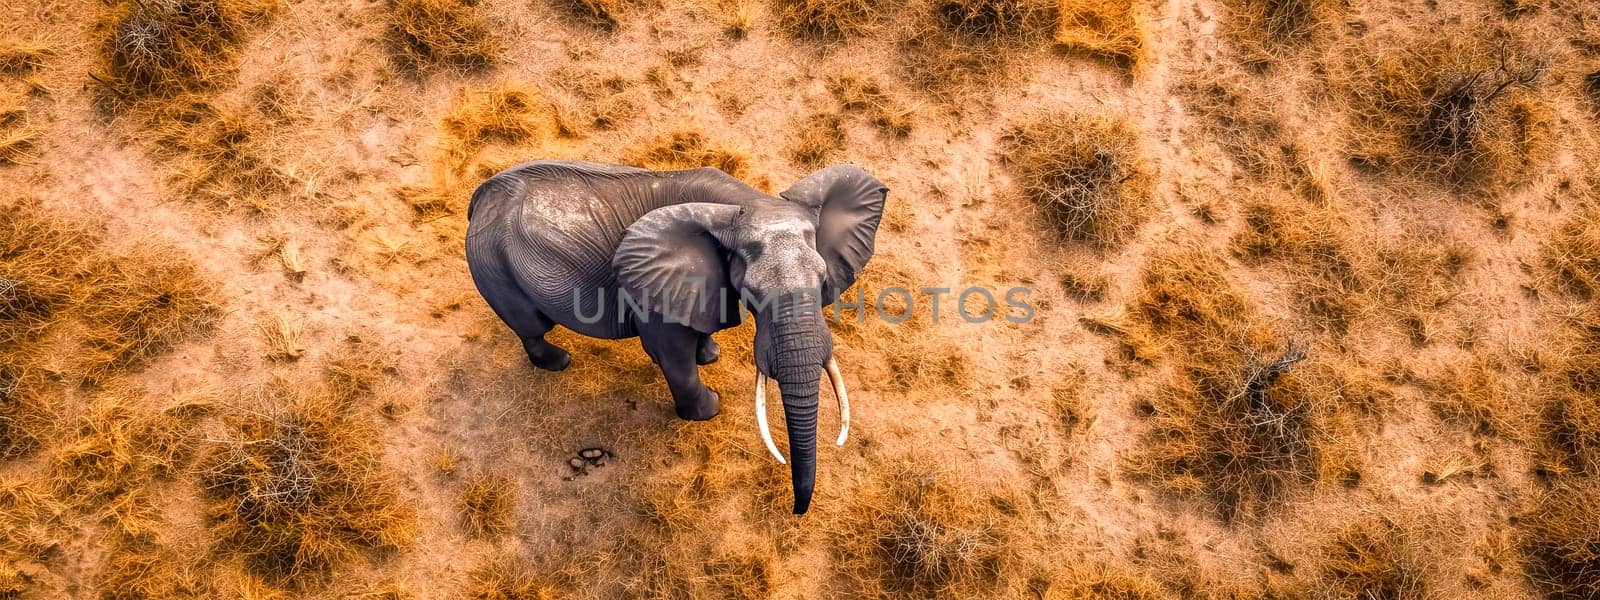 An aerial view capturing a solitary elephant roaming the dry savannah, with the warm tones of the landscape highlighting the gentle giant's presence in its natural habitat. by Edophoto